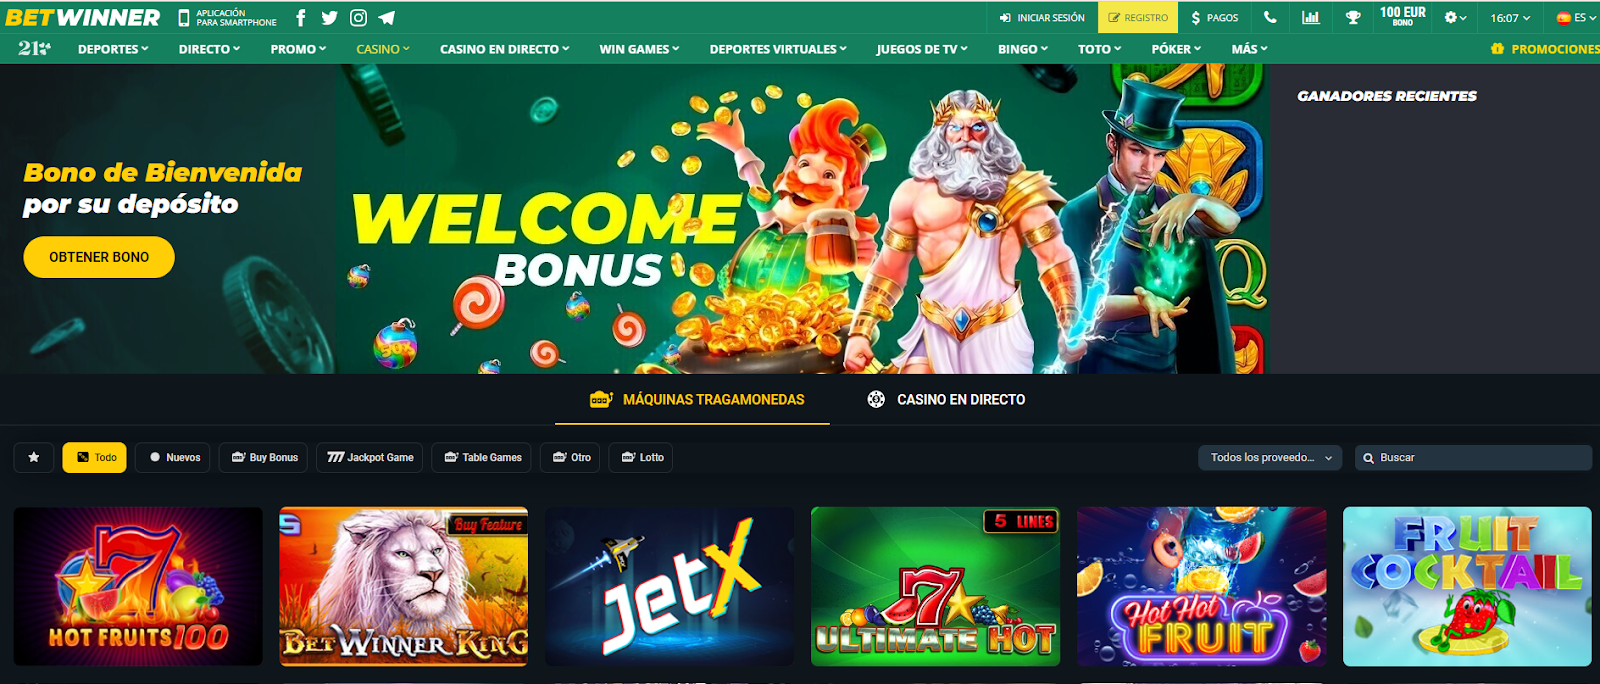 Betwinner bonus cod in Android and IOS devices